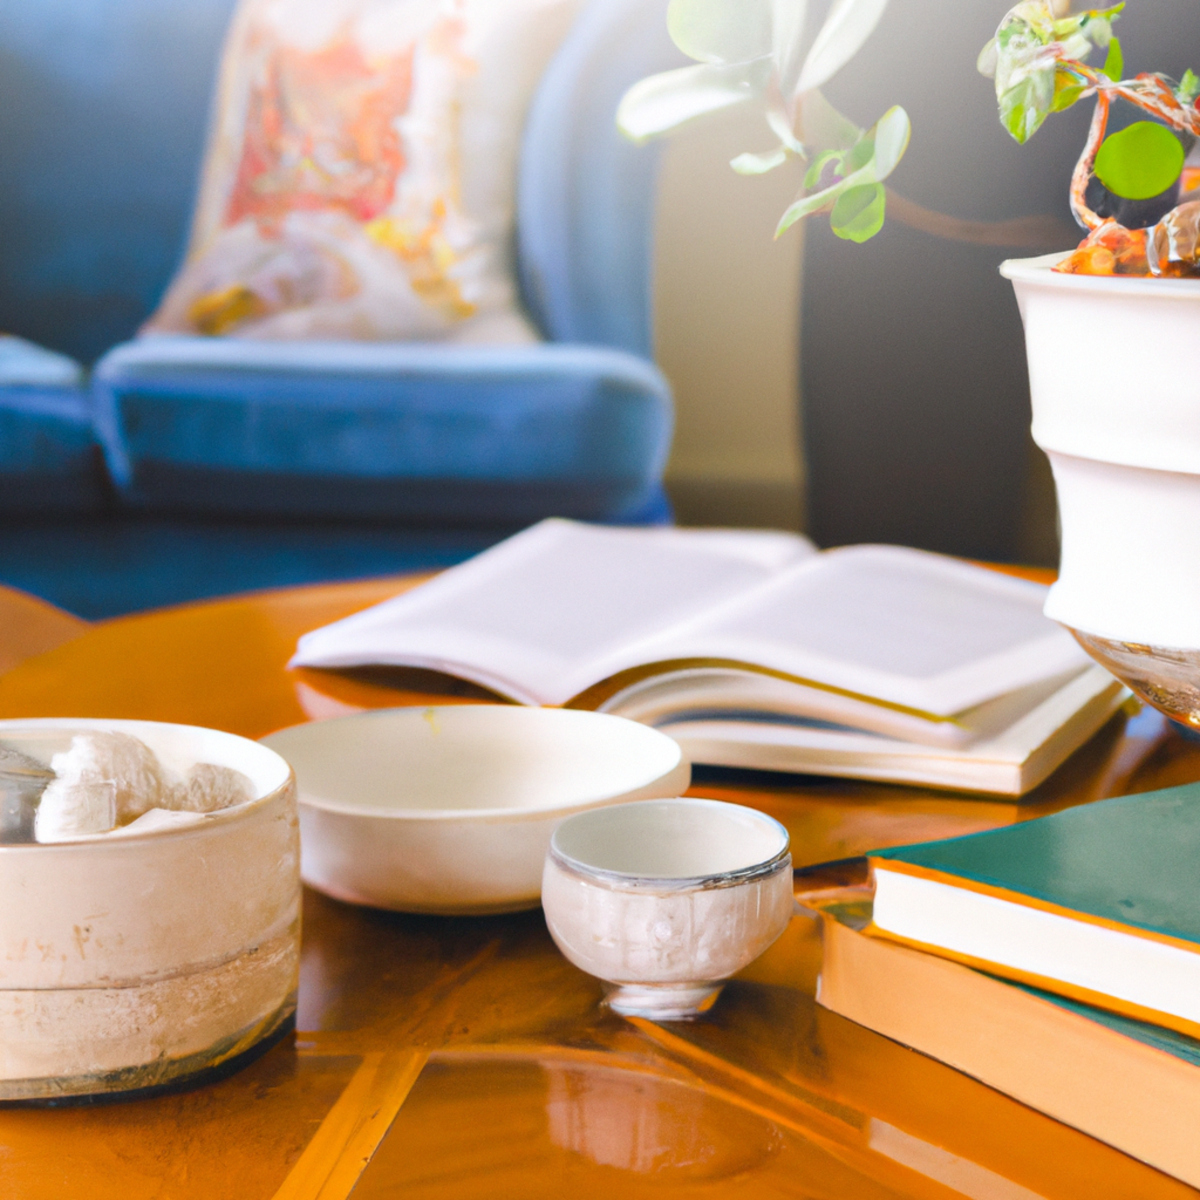 Cozy living room with mindful objects: books, pebbles, candle, cushion. Serene scene promoting self-care and stress management.